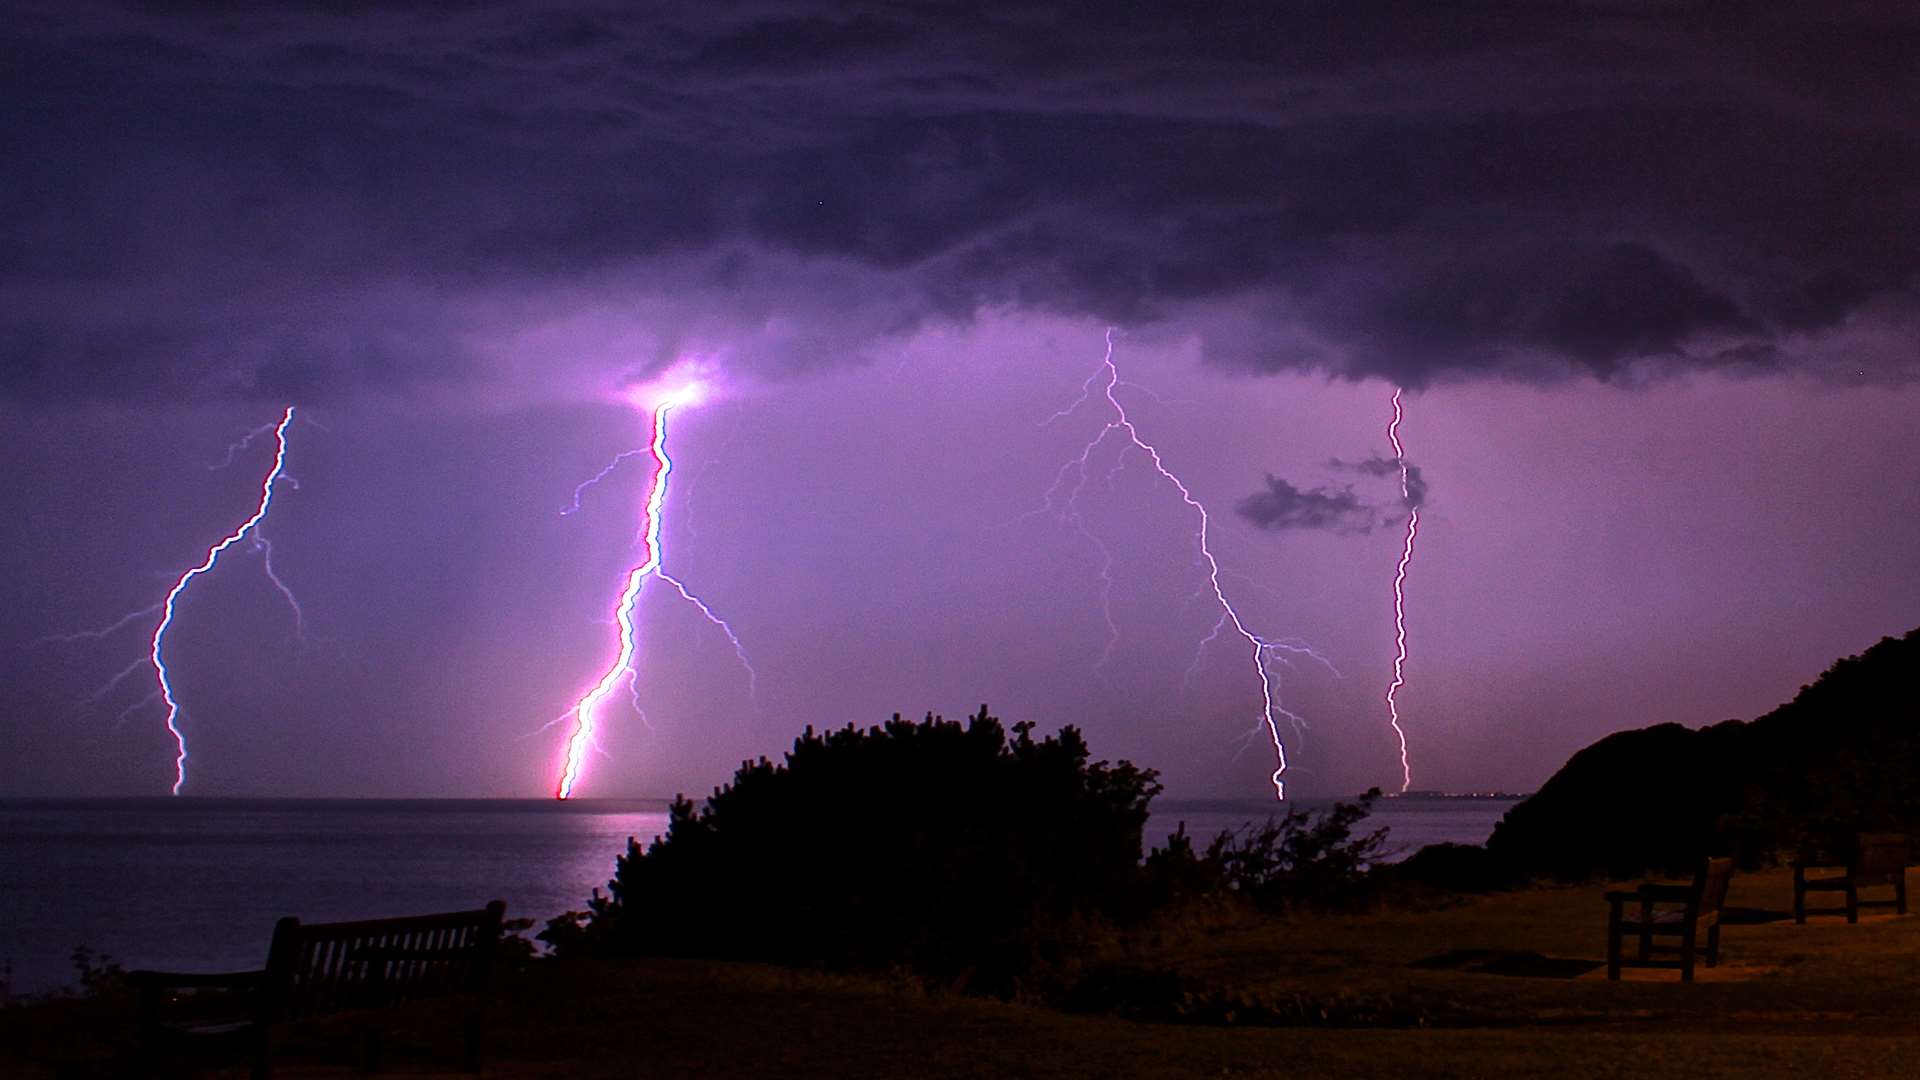 Storm lights up the sky above The Leas in Folkestone. Picture: Phelan McCormack